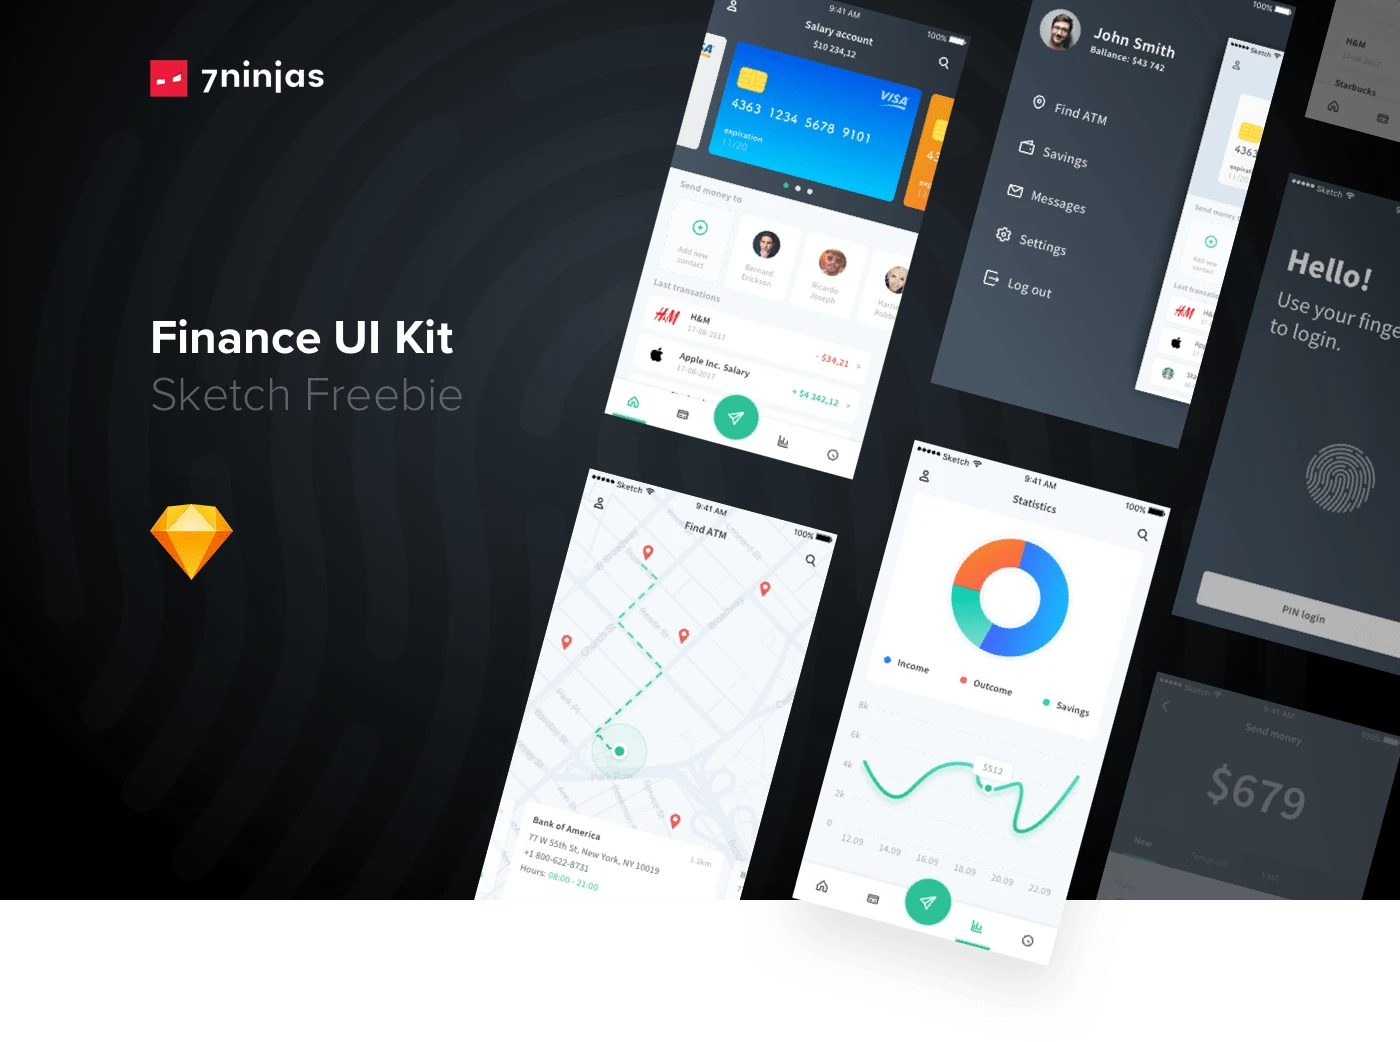 Free Finance UI Kit - Kickstart your project or just have fun with it. Designed by 7ninjas